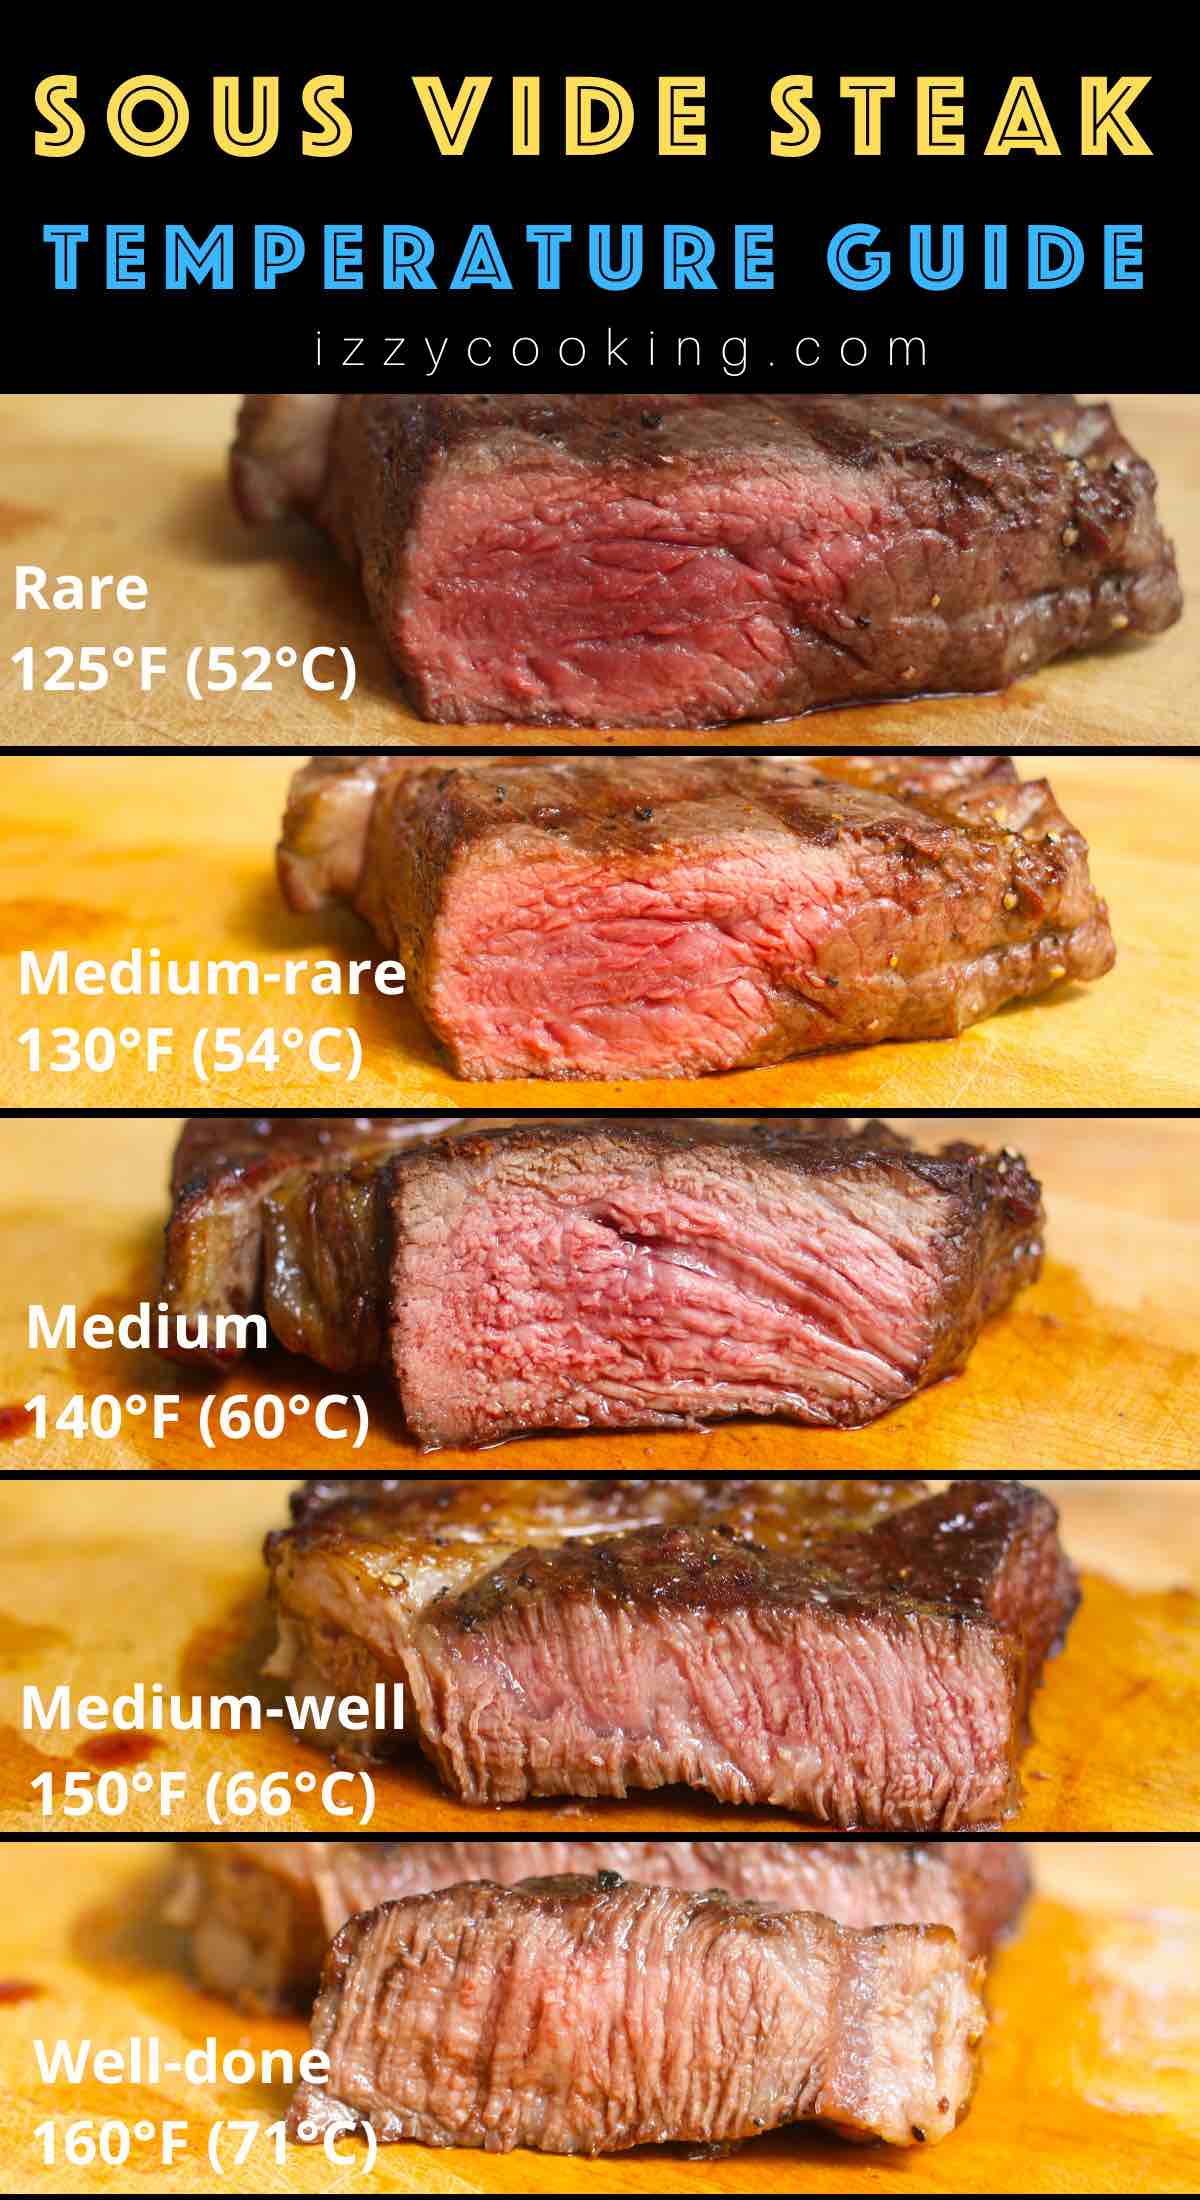 Selecting the right temperature and doneness is the most important step to sous vide cook a steak. Whether you like a super juicy and rare steak, medium, or a well-done steak, sous vide machine provides the precise temperature control. Here is a complete guide for cooking the best steak ever! #SousVideSteakTemp #SousVideSteak